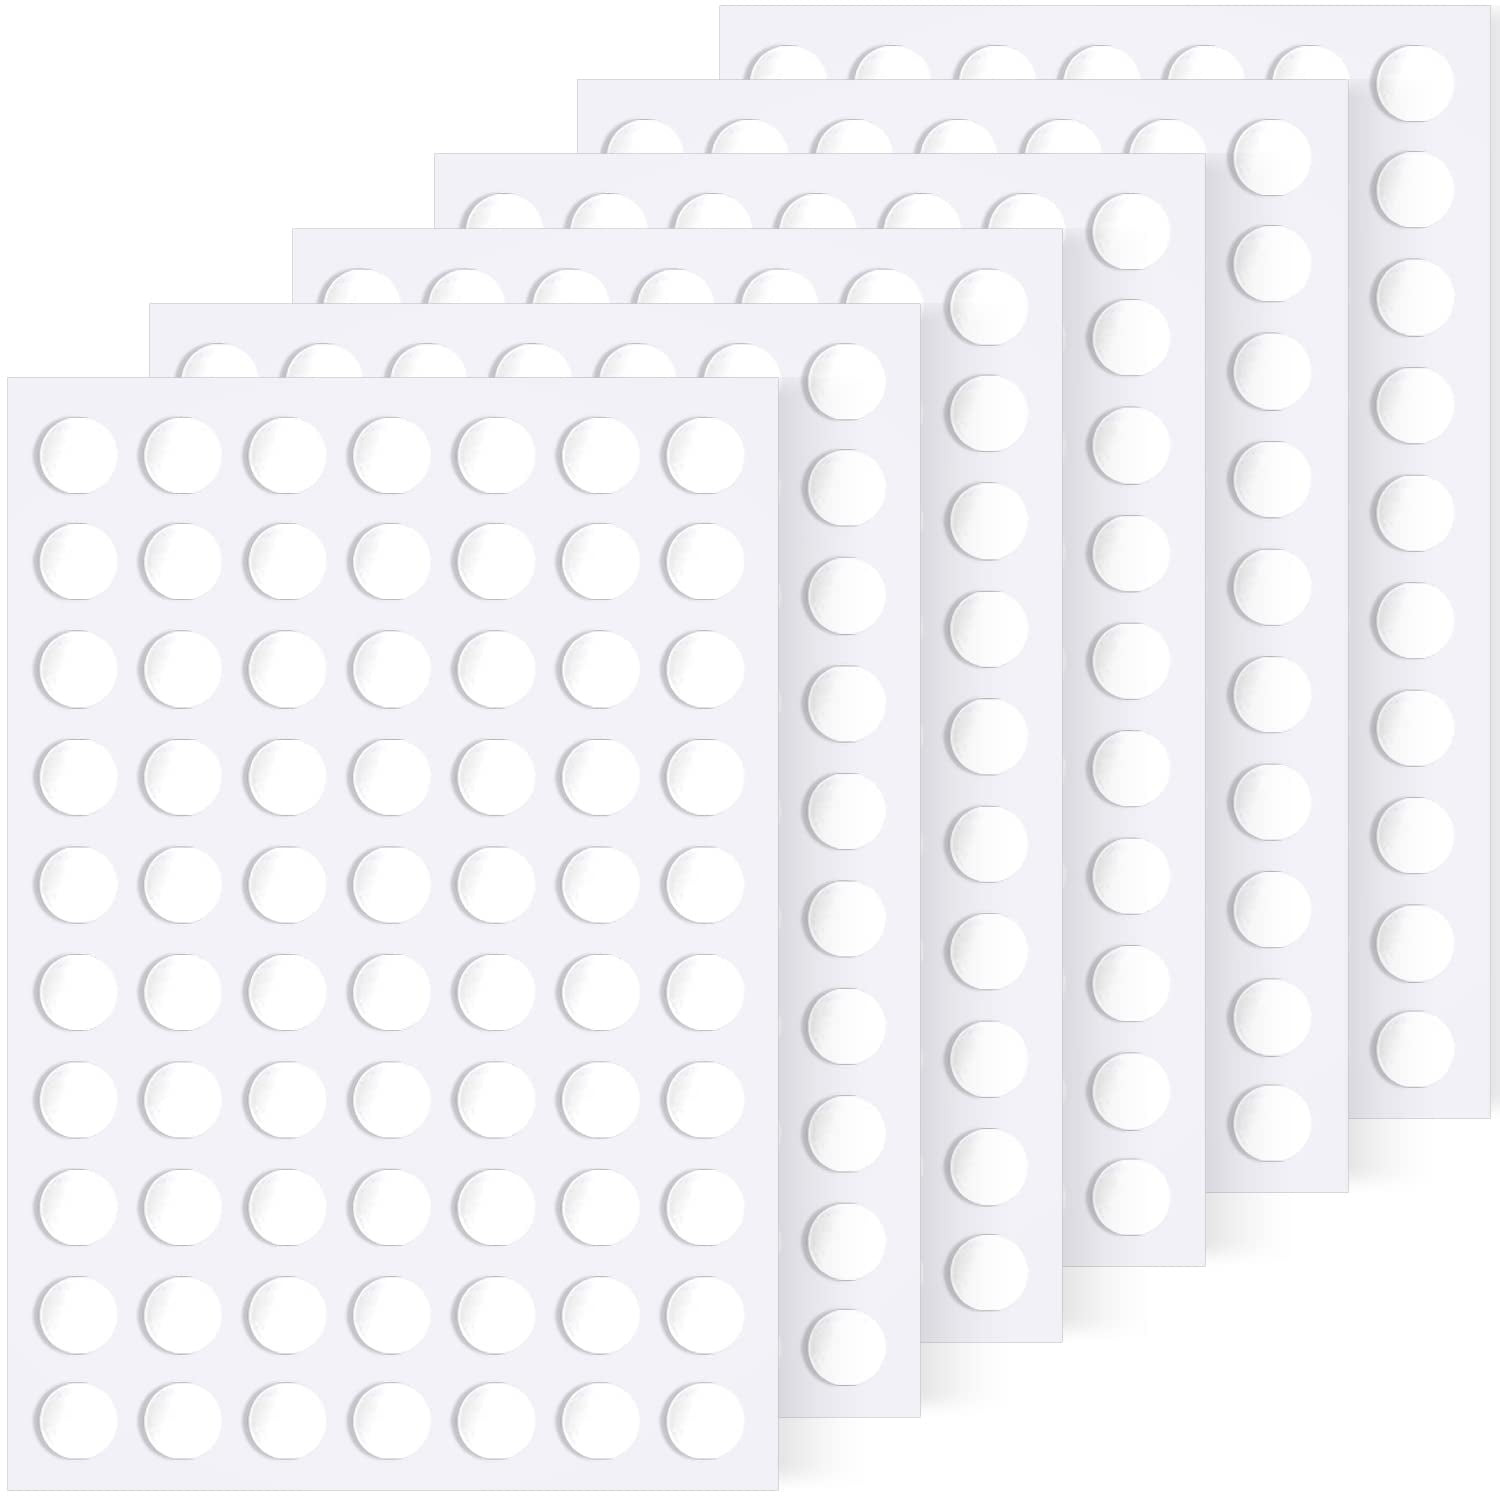 Sticky Dots, 420 6mm/0.24 Adhesive Tack, Double Sided Removable Clear  Mounting Round Tacky Dots Transparent Reusable Sticker Putty Glue for  Hanging Pictures Posters on Wall, Art Craft 